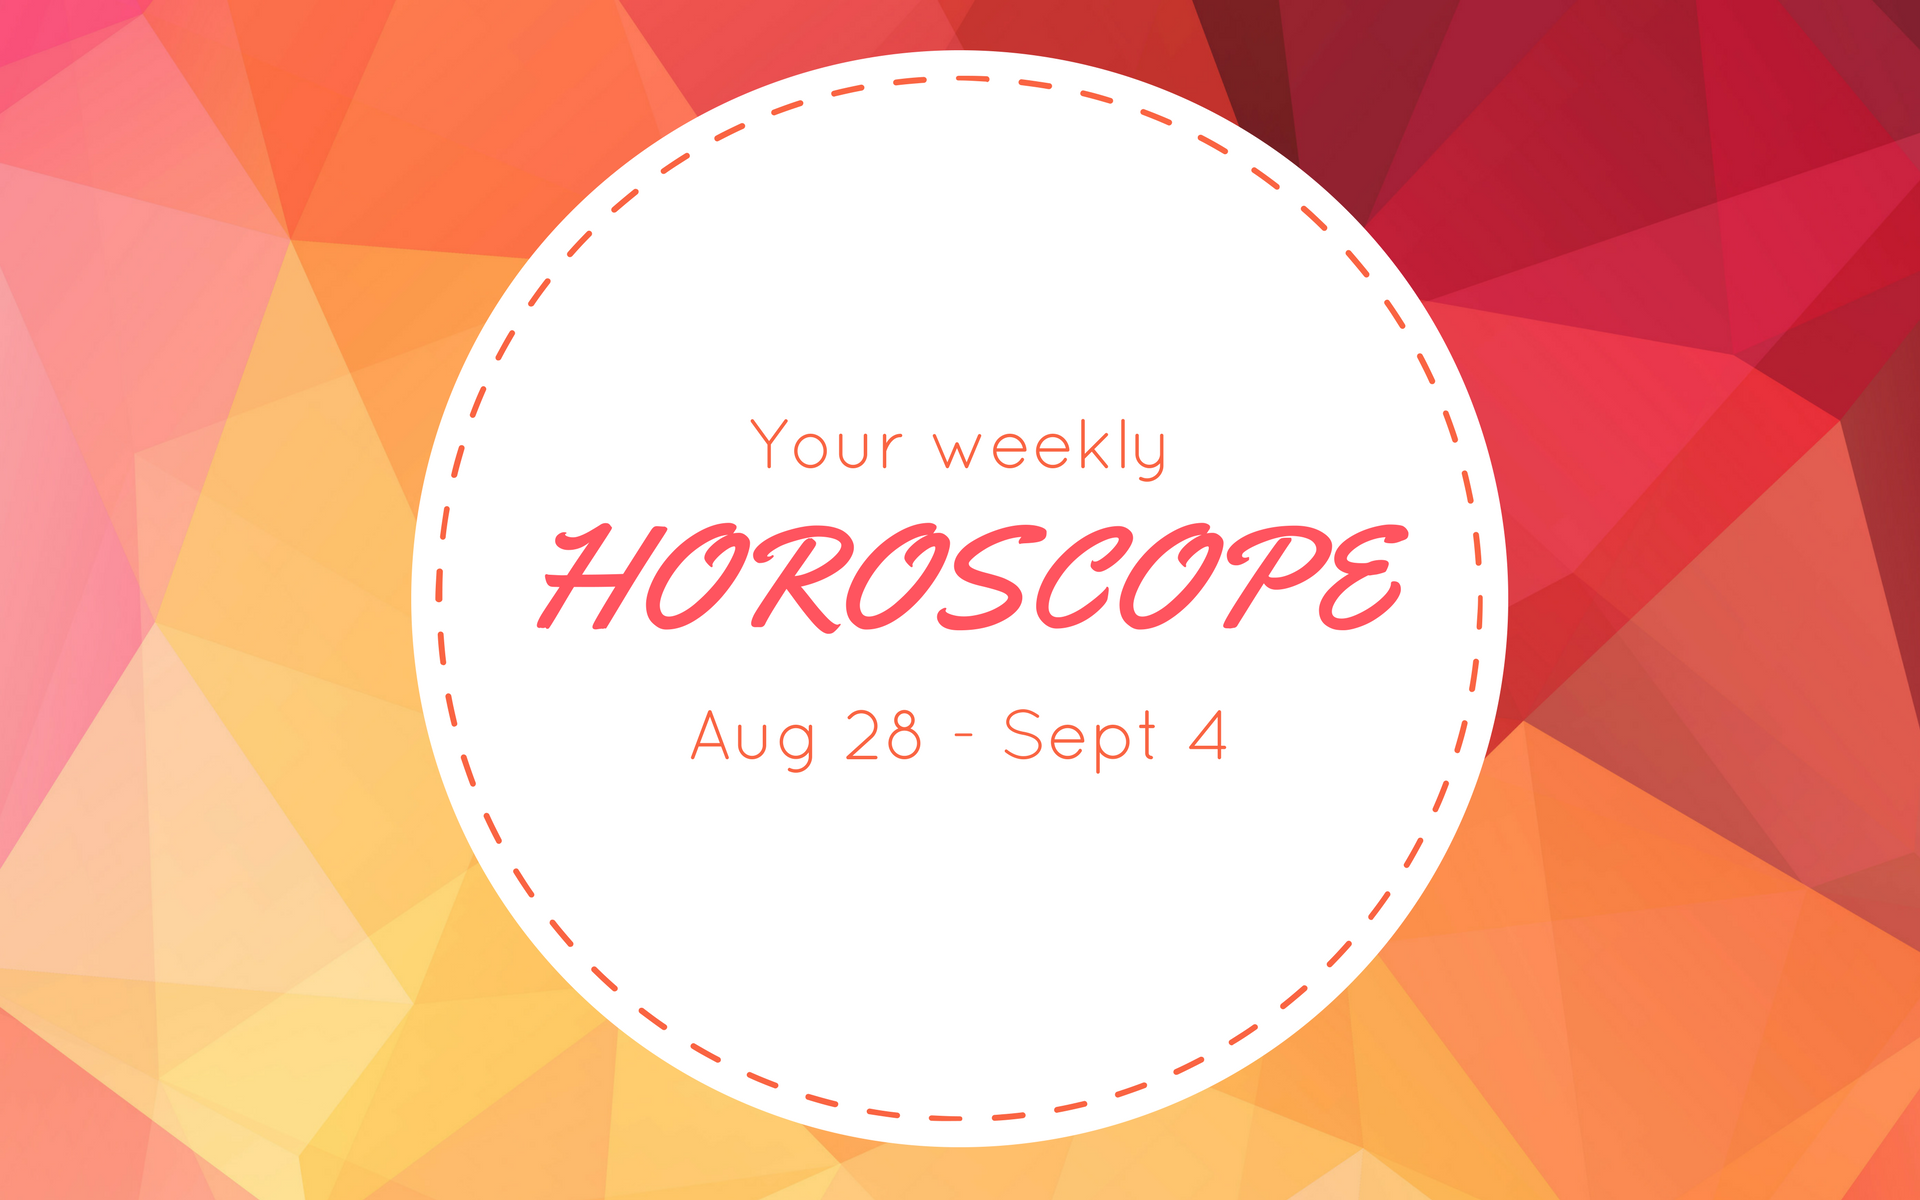 Your Weekly Horoscope: August 28 - September 4